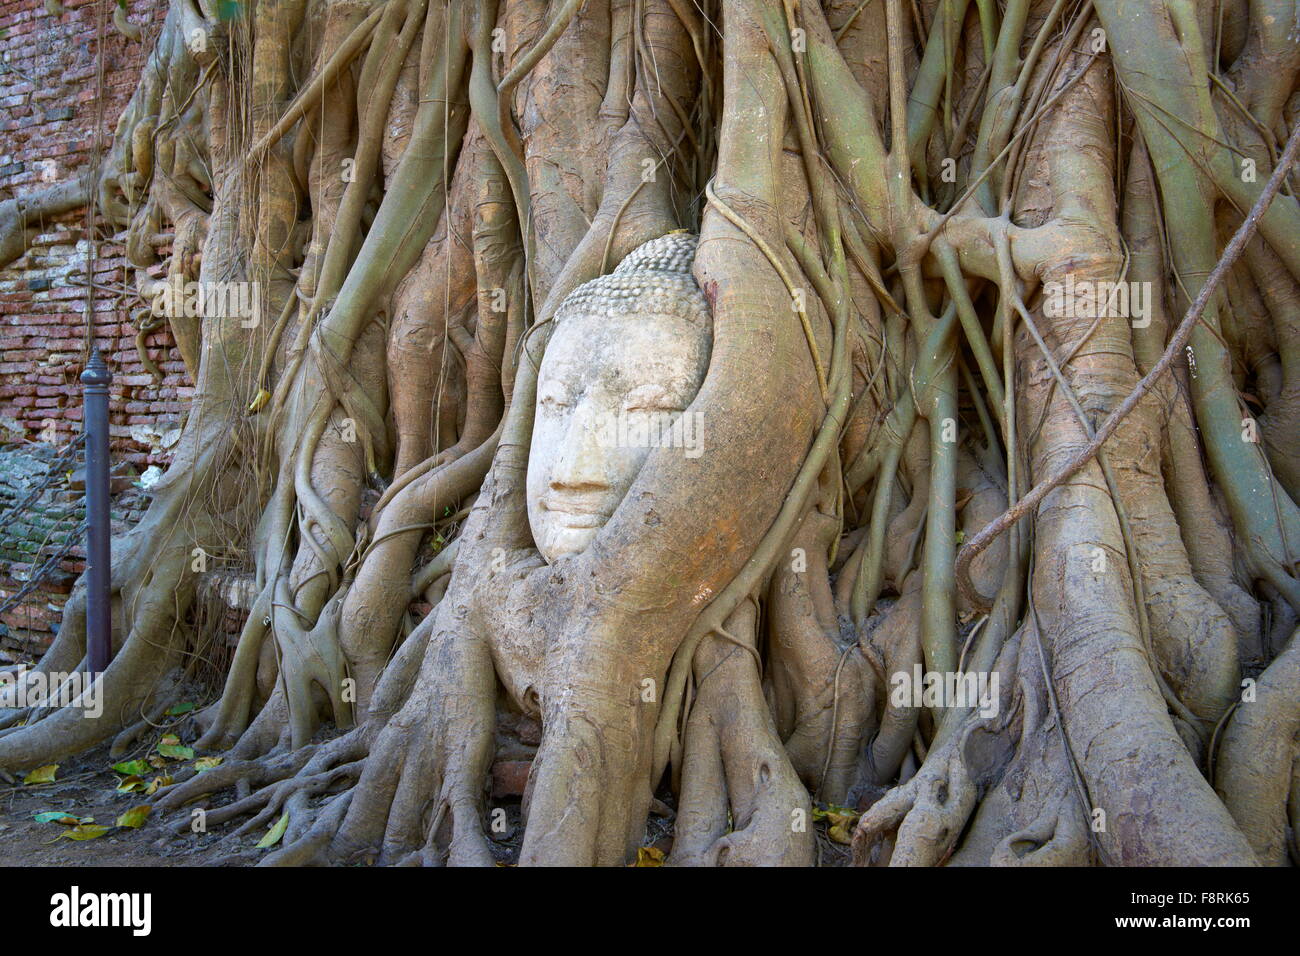 Thailand - Ayutthaya, Wat Mahathat Temple, a Buddha head overgrown with tree roots Stock Photo